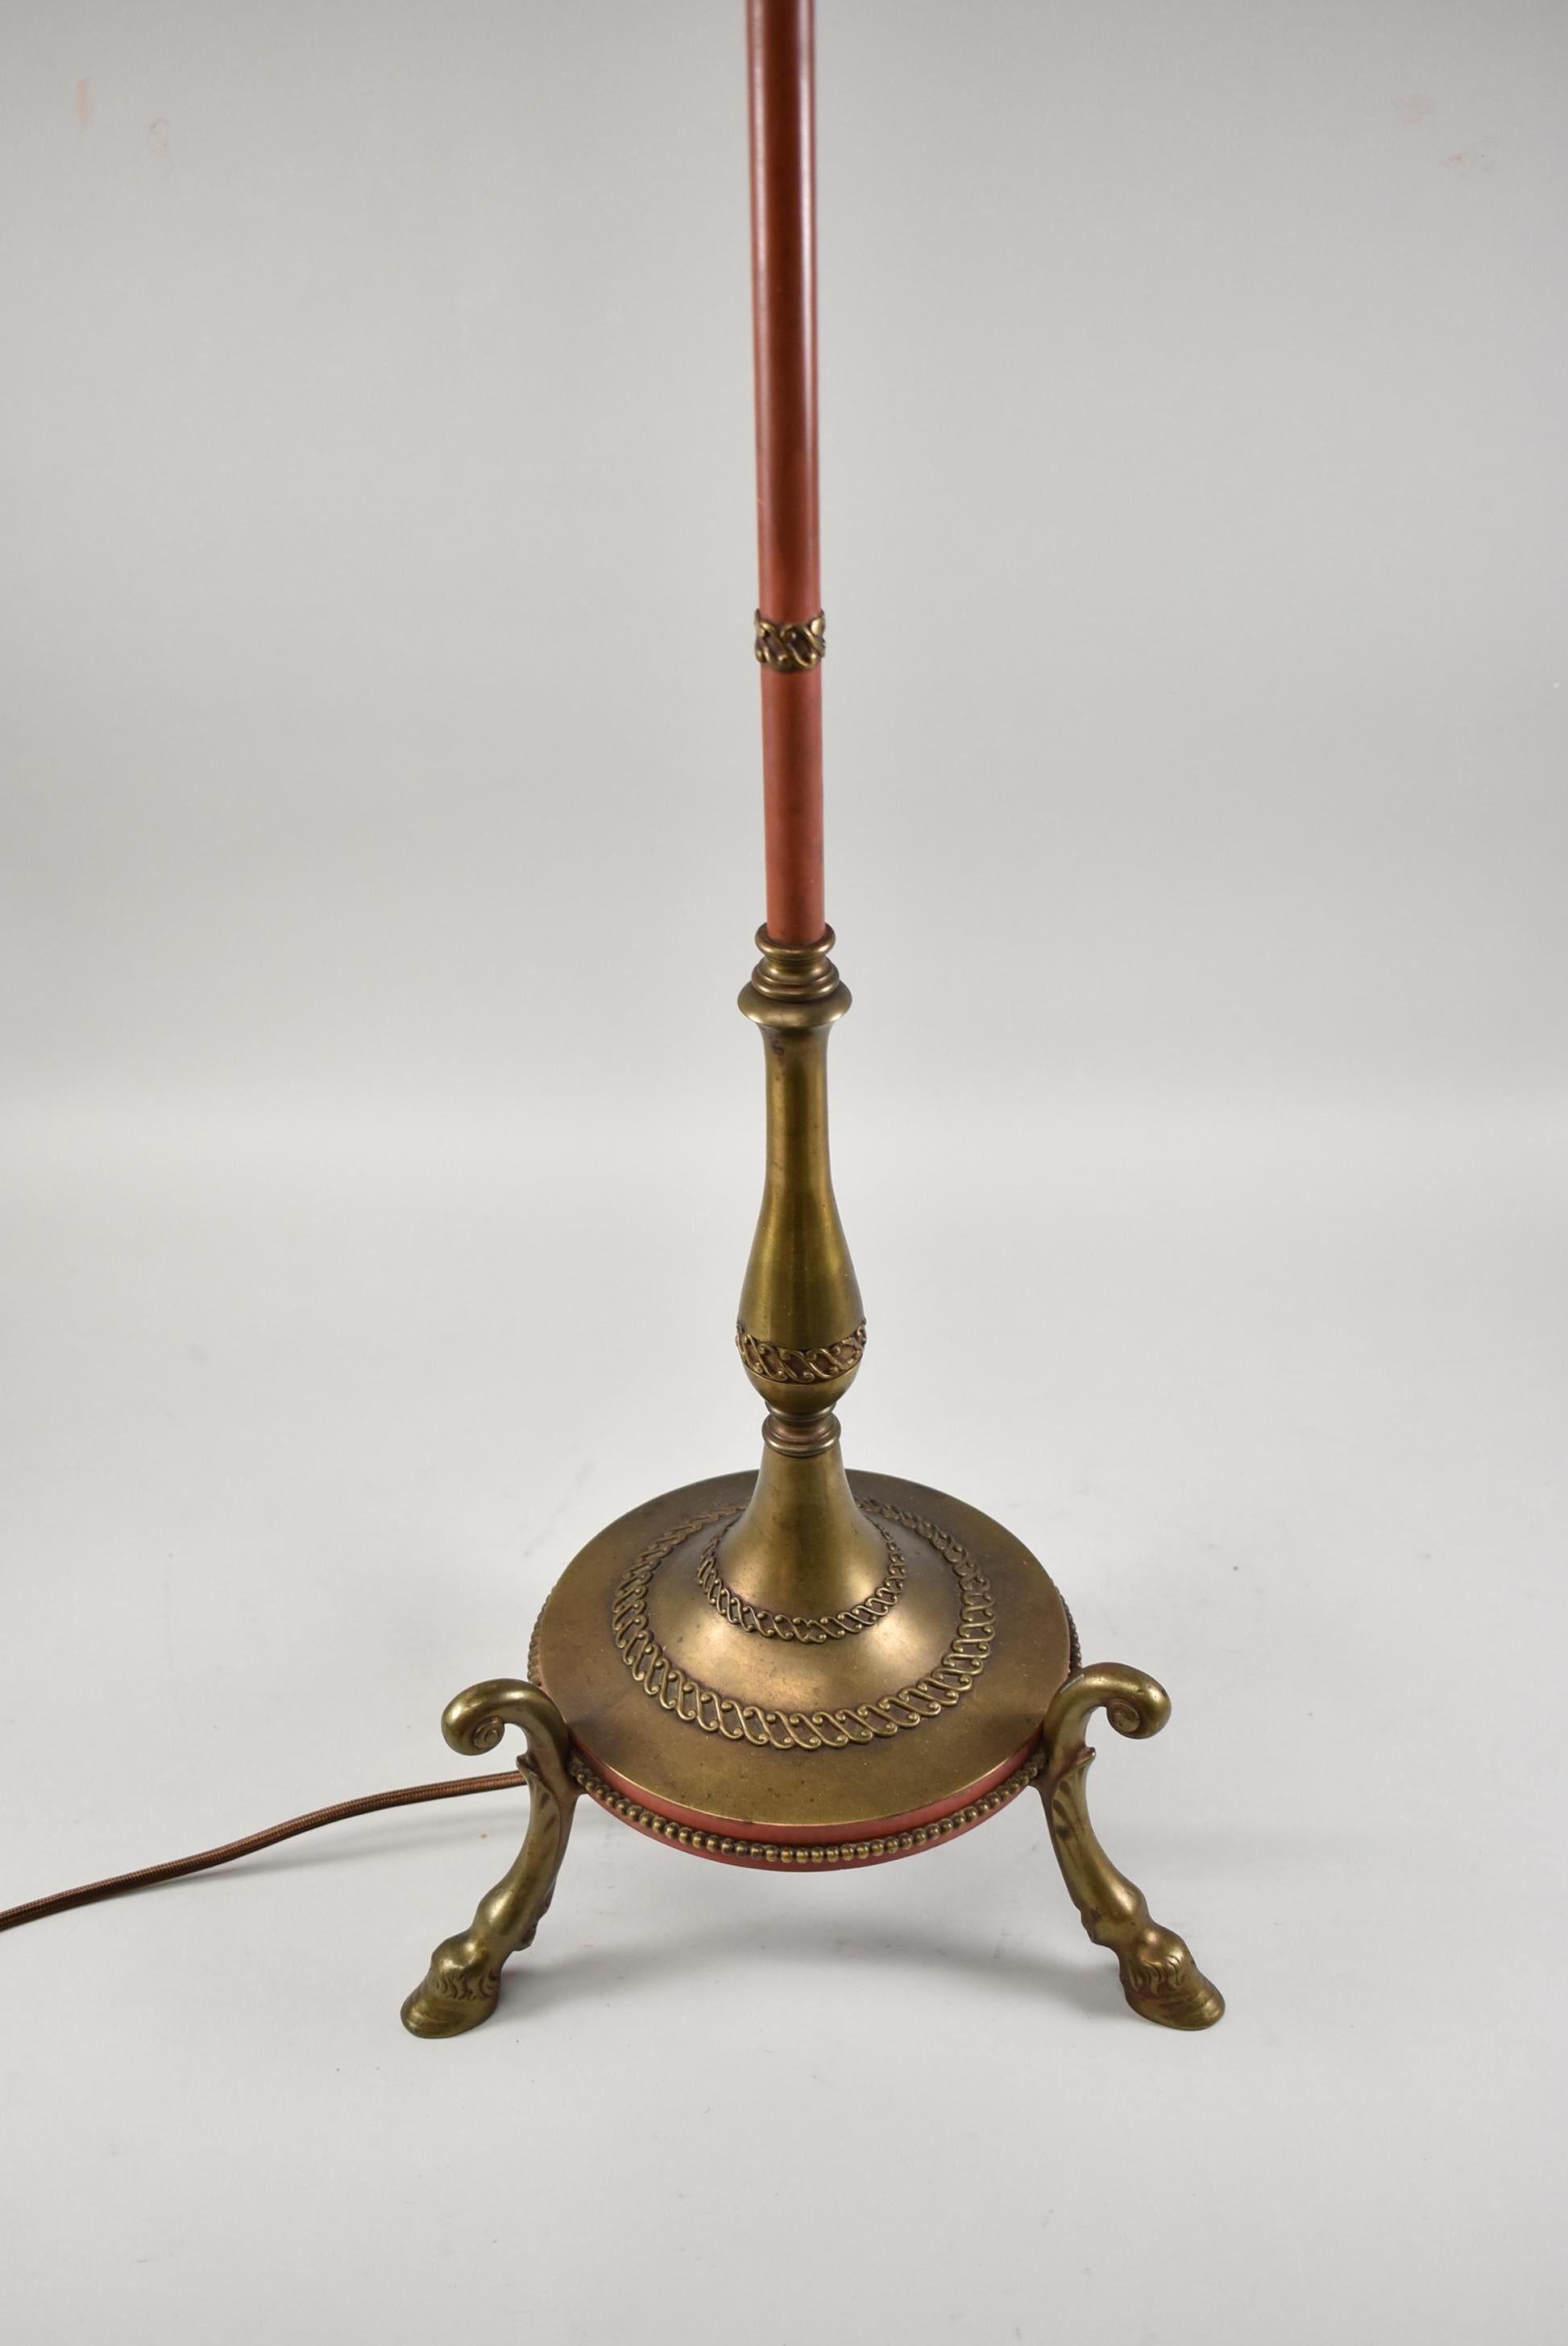 Brass and painted floor lamp with hoof footed base and figural cherubs. Three sockets, circa 1910-1920. Shade is not included.